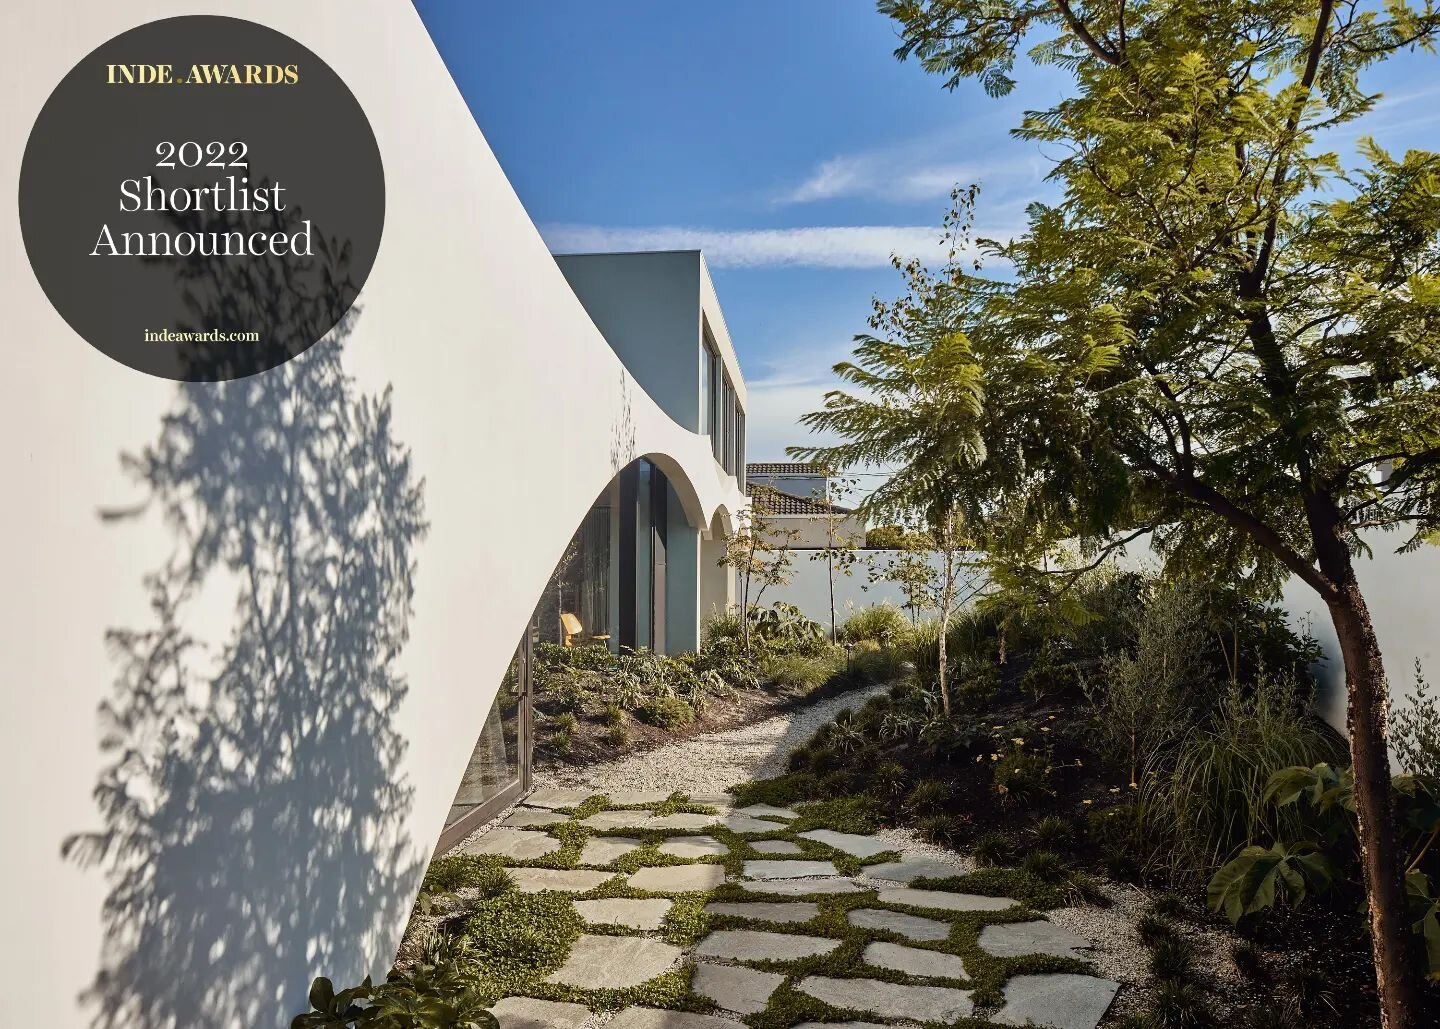 So excited to see that The bridge house has been shortlisted in the #indeawards 2022.

Thanks @indesignlive !

@basisbuilders 
@acre_studio 
@gardensbyform

@peterbbennetts